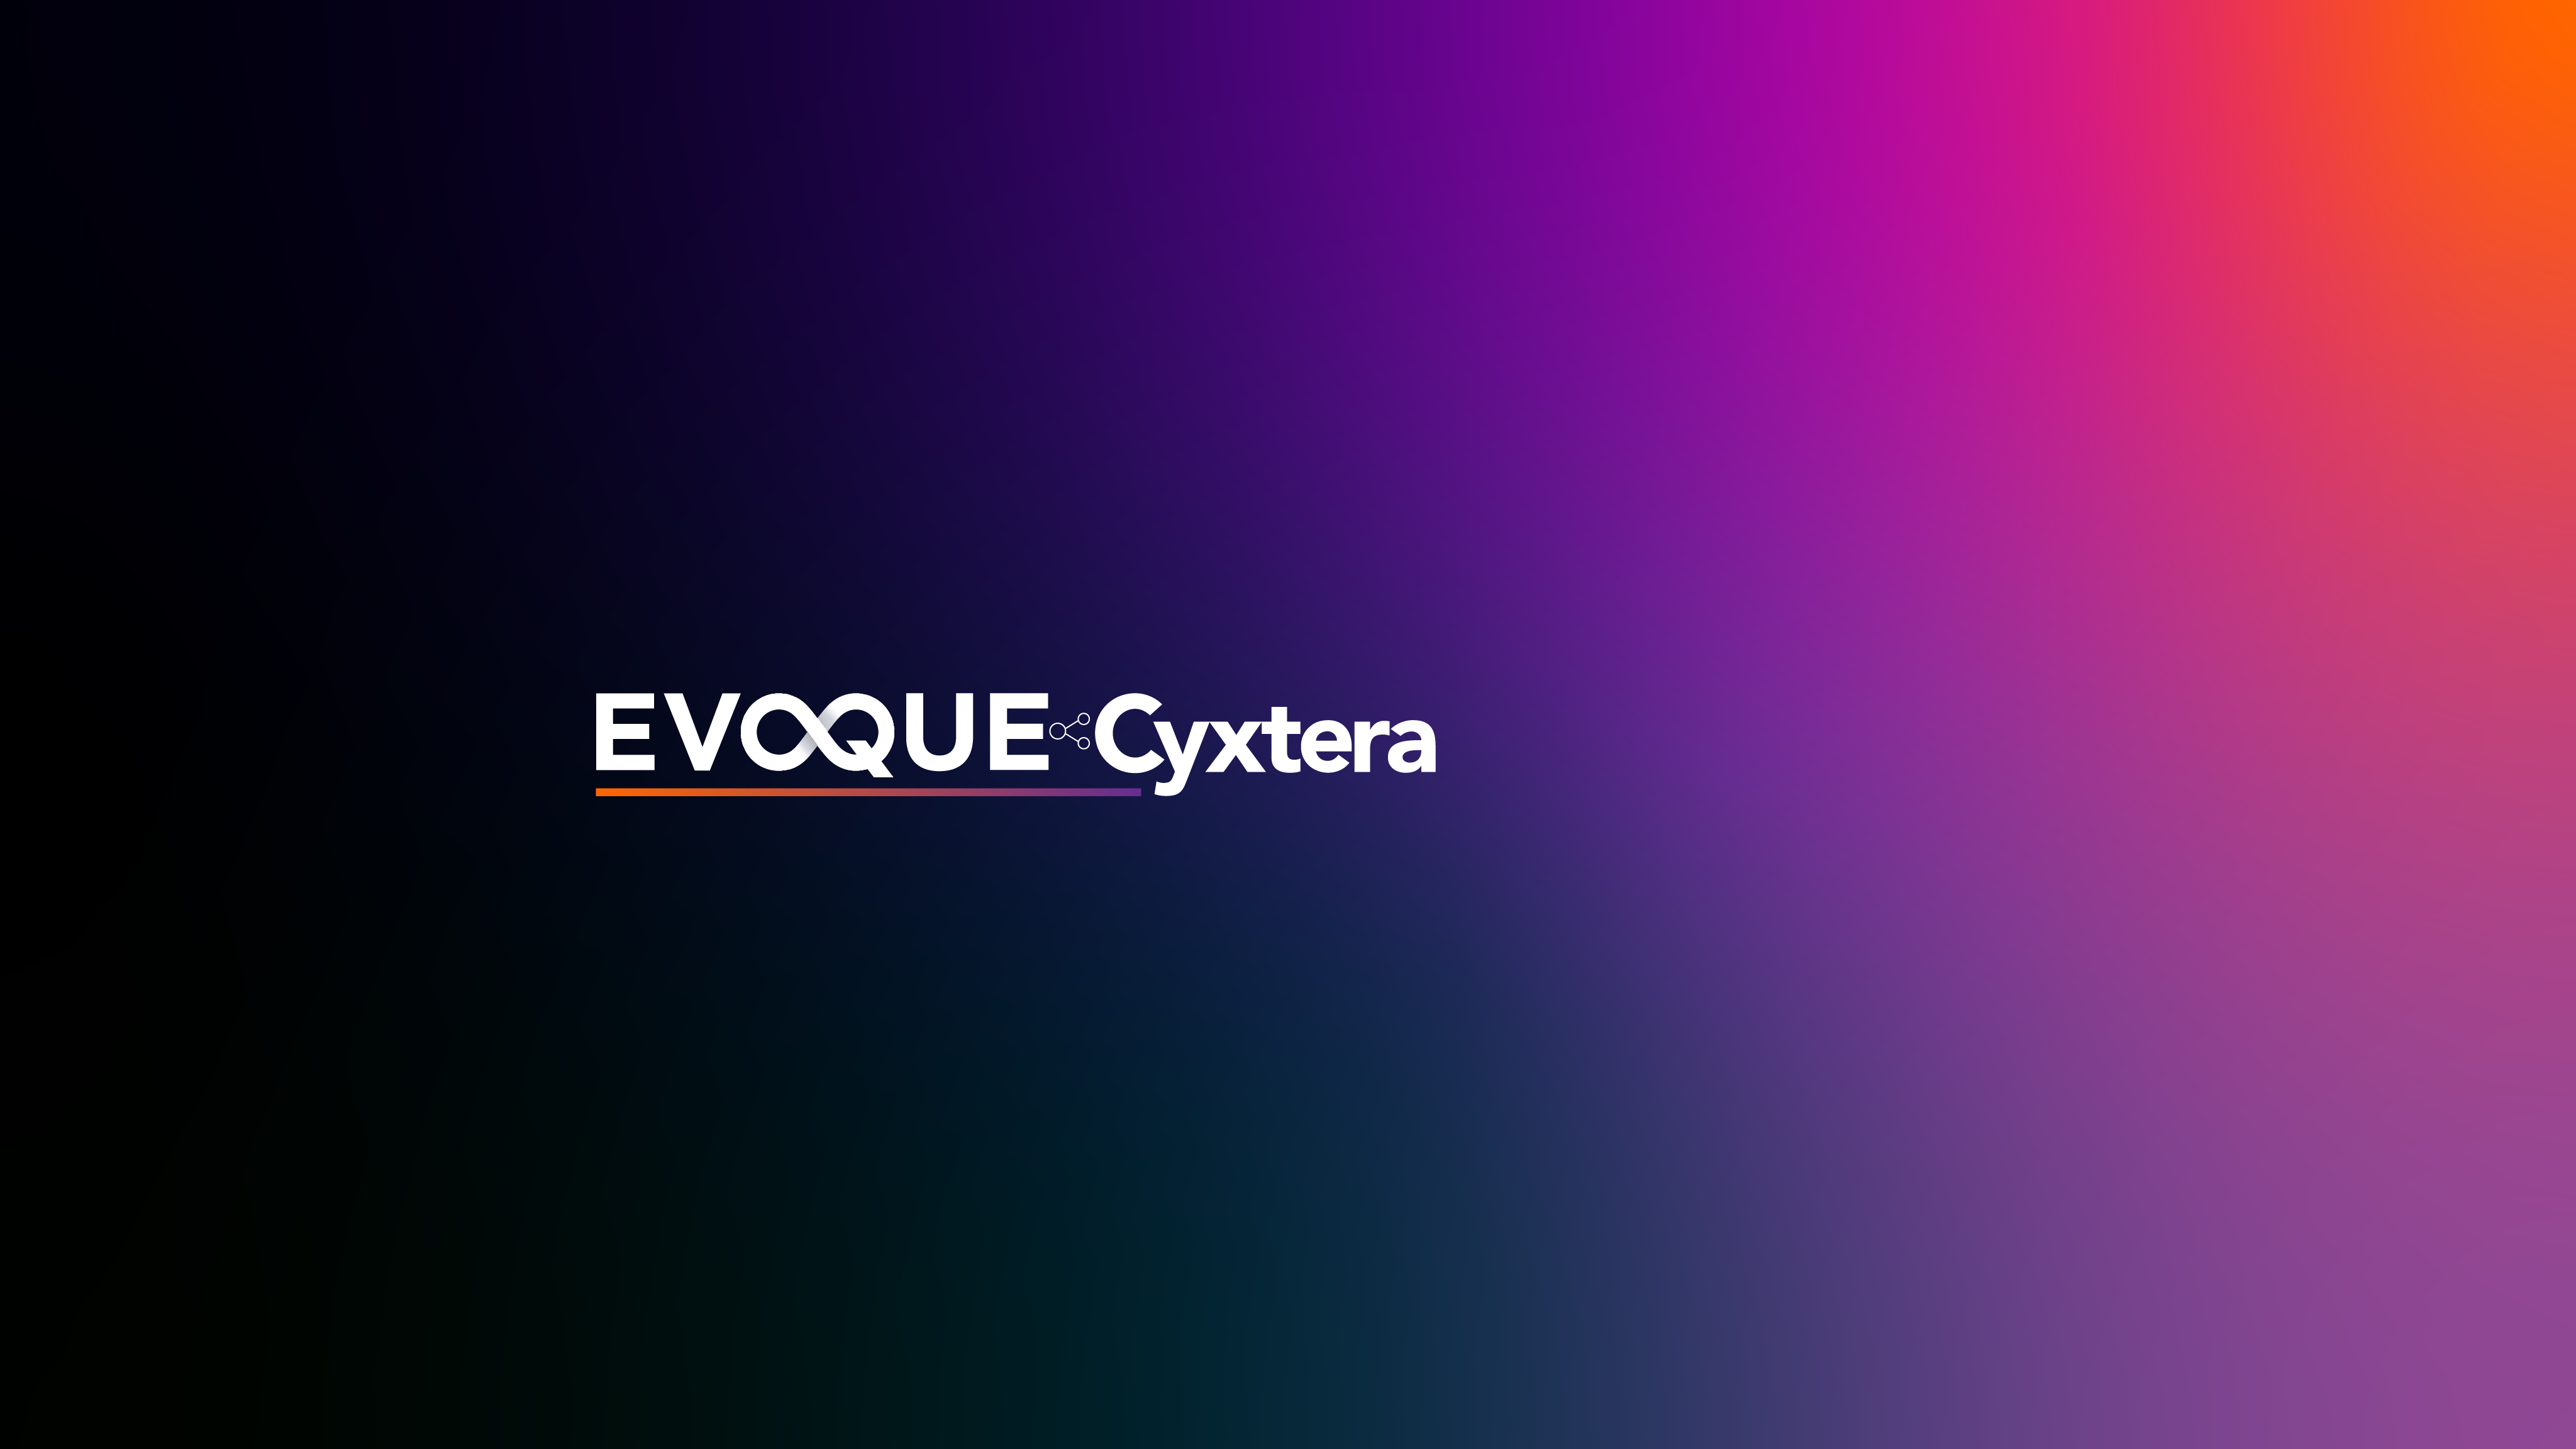 EVOQUE DATA CENTER SOLUTIONS CLOSES ACQUISITION OF CYXTERA